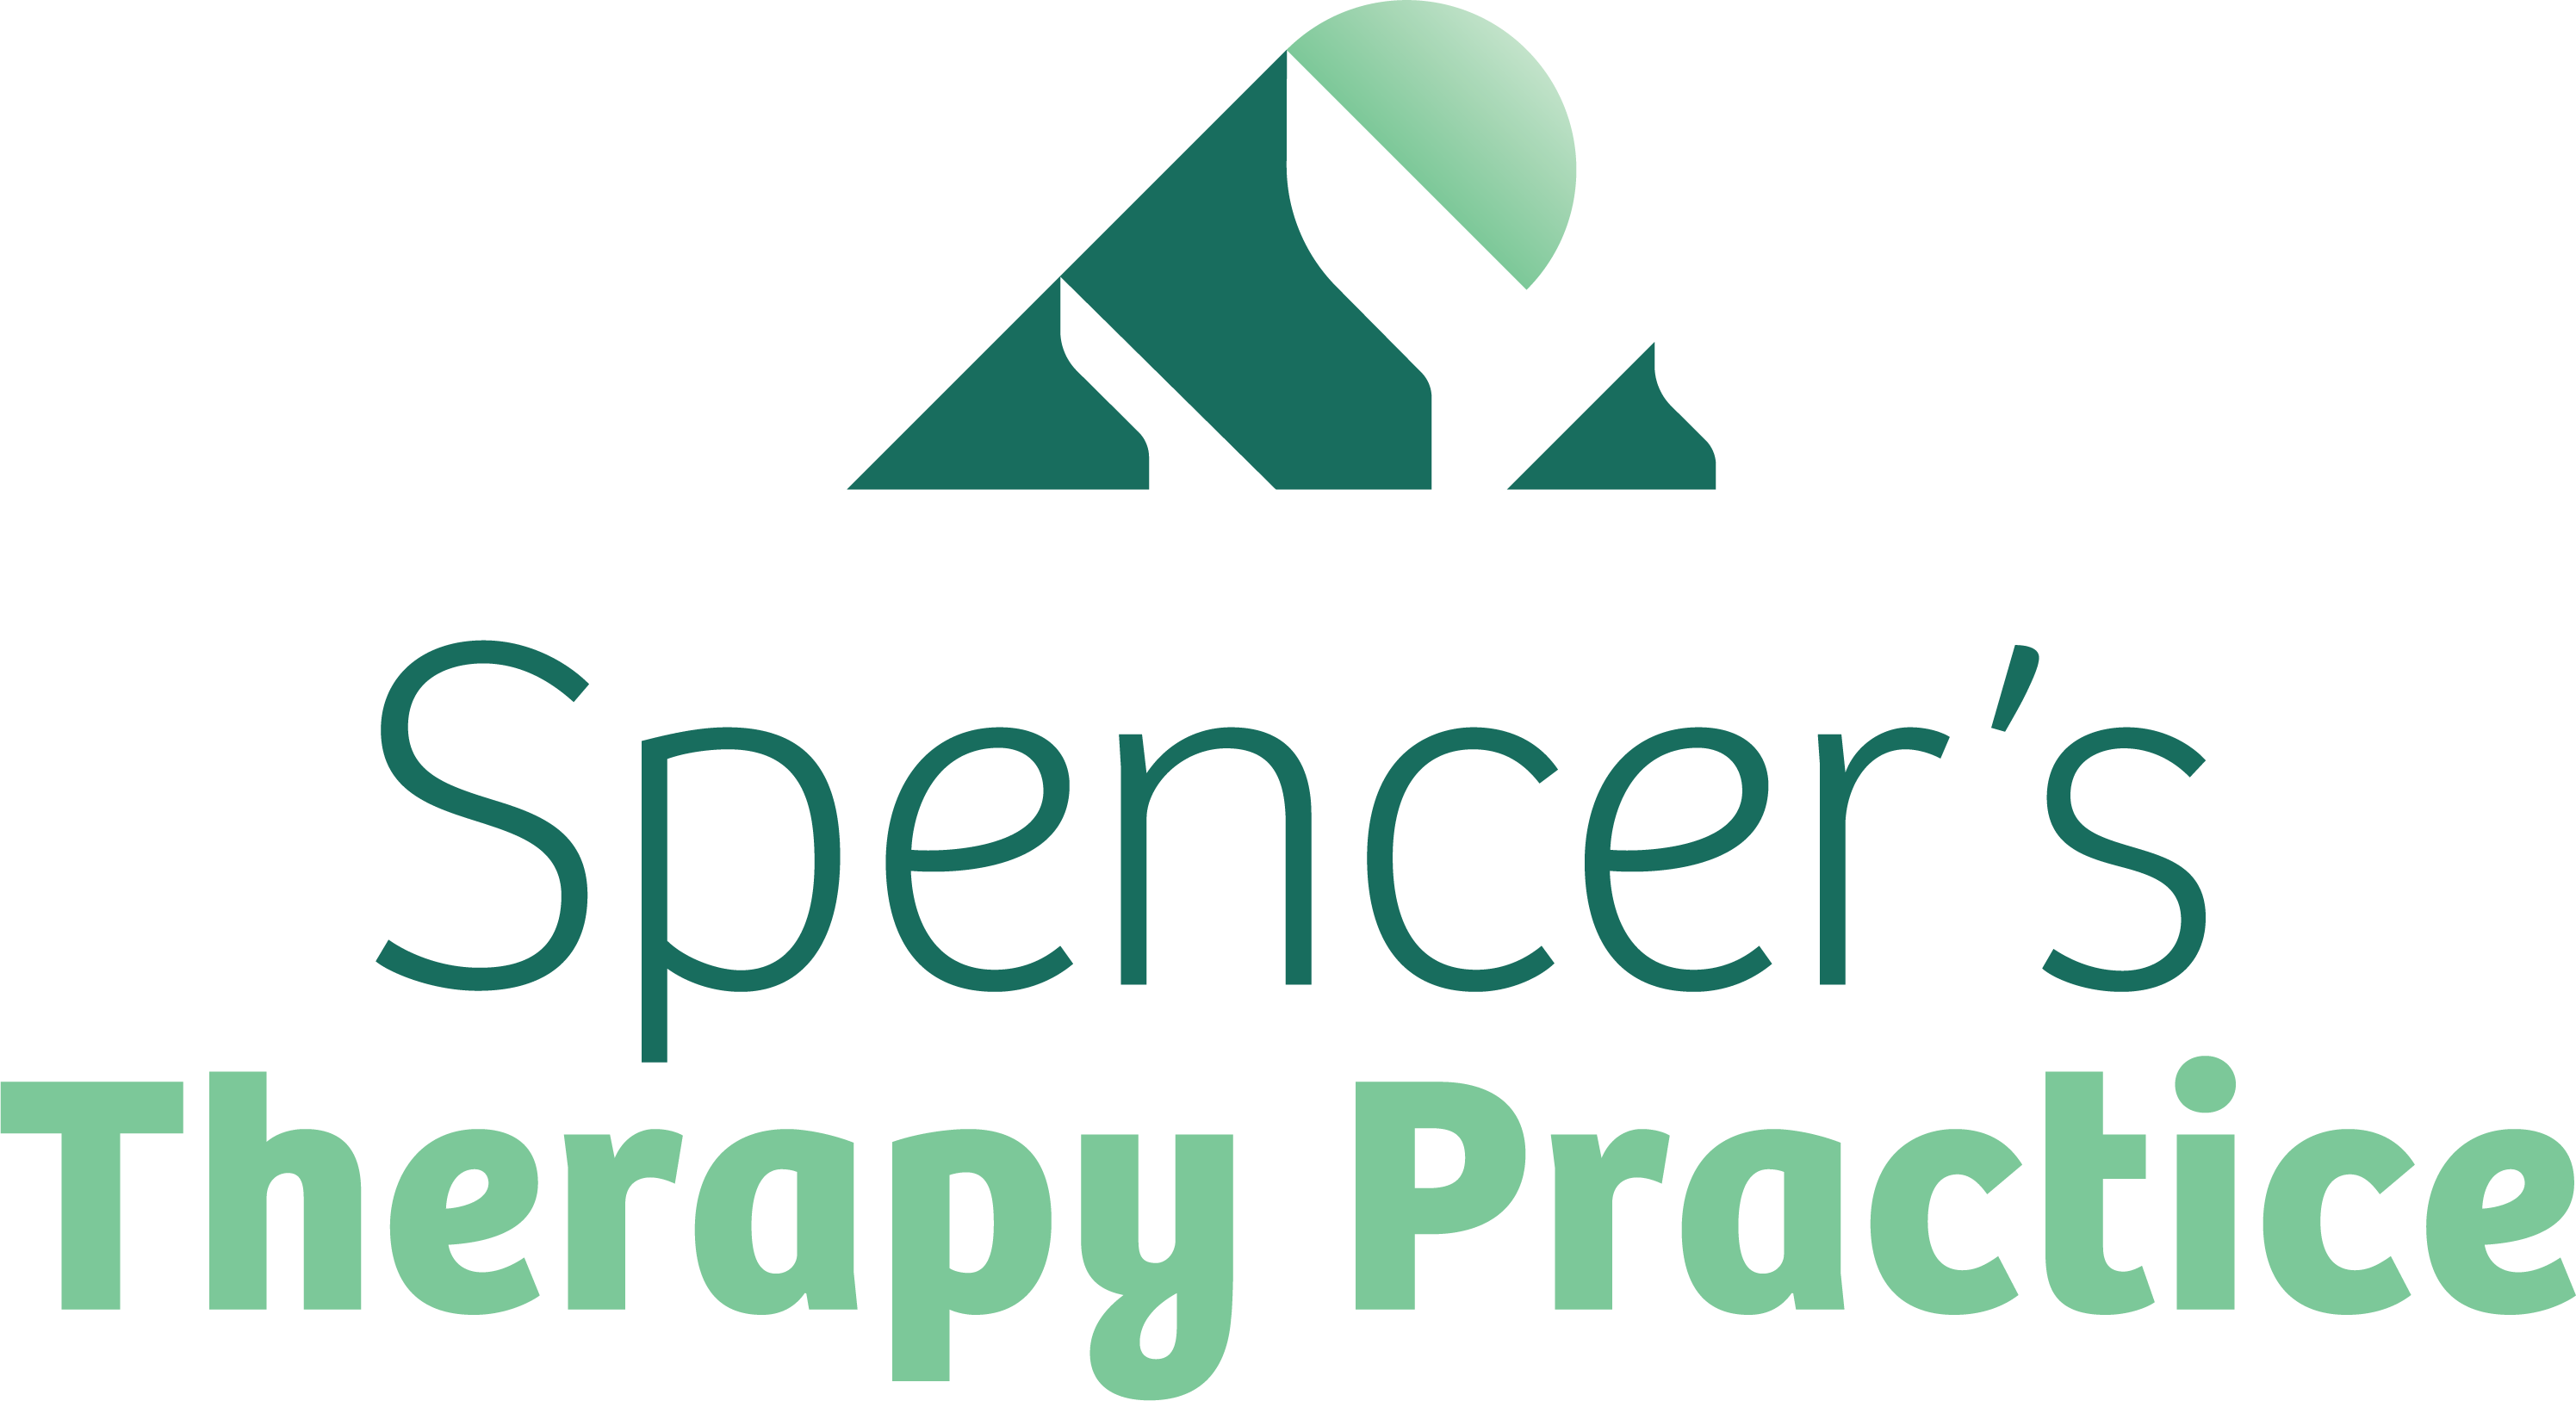 Spencer's Therapy Practice LLC